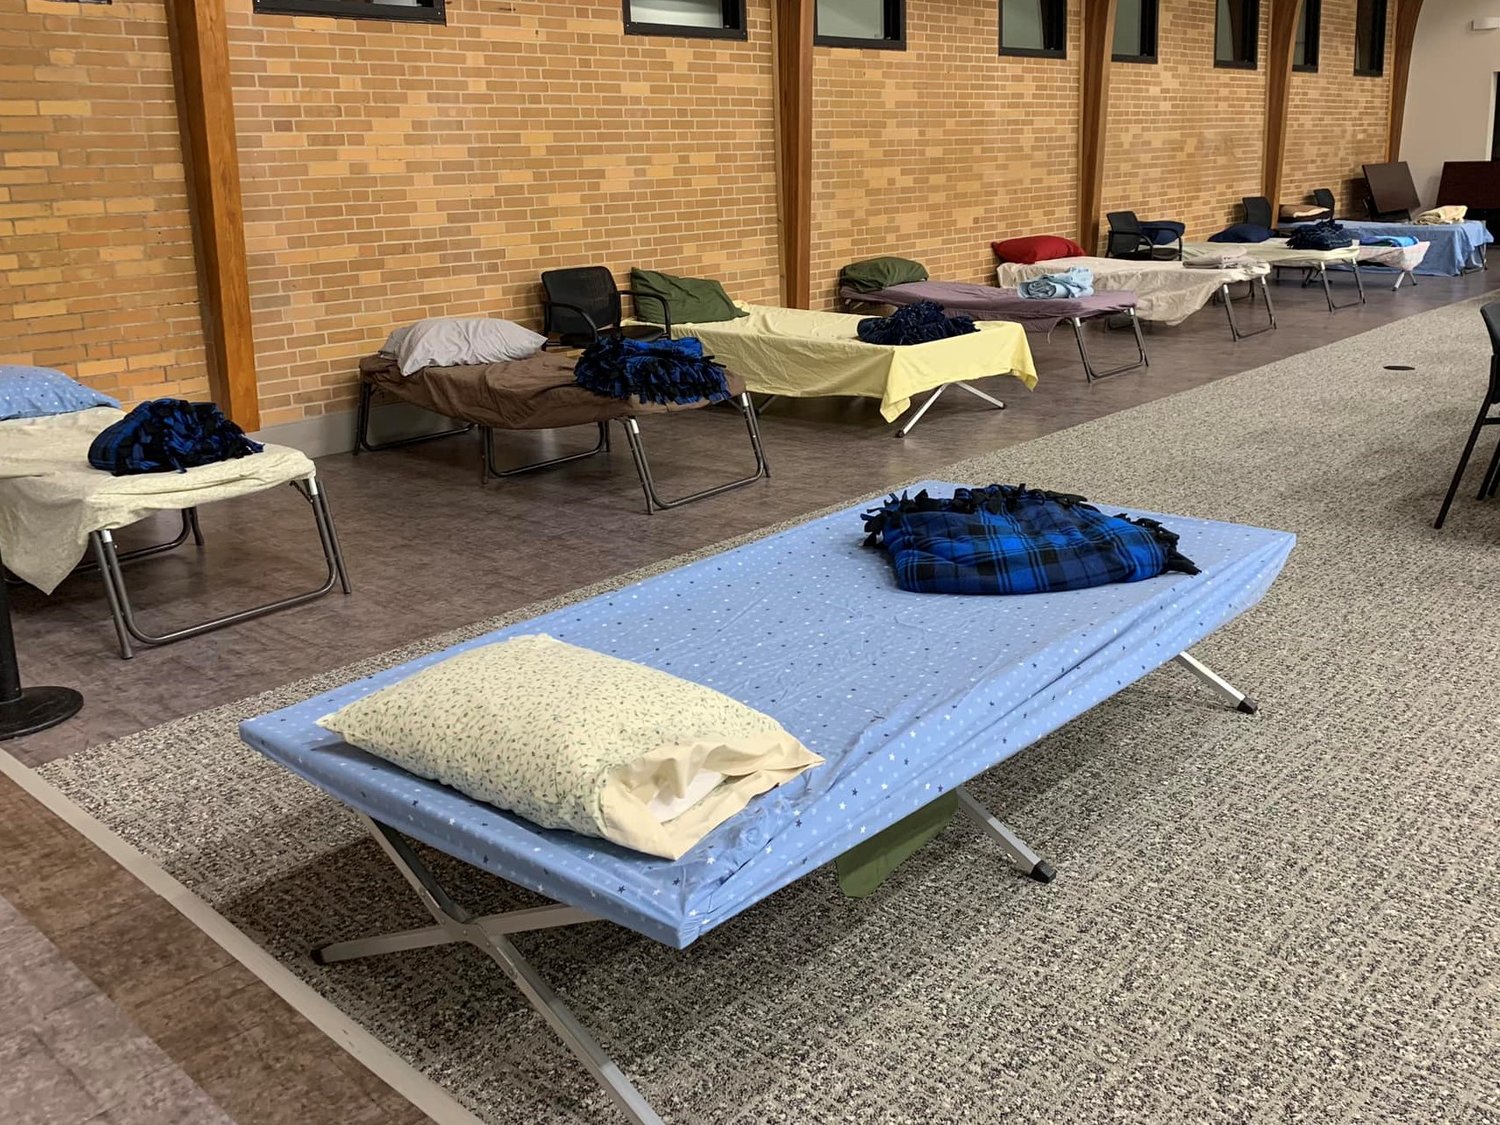 The cots are set up and ready to welcome guests to Jefferson City Room at the Inn, an interchurch emergency shelter that’s open each night in January and February in the Catholic Charities Community Room in Jefferson City.